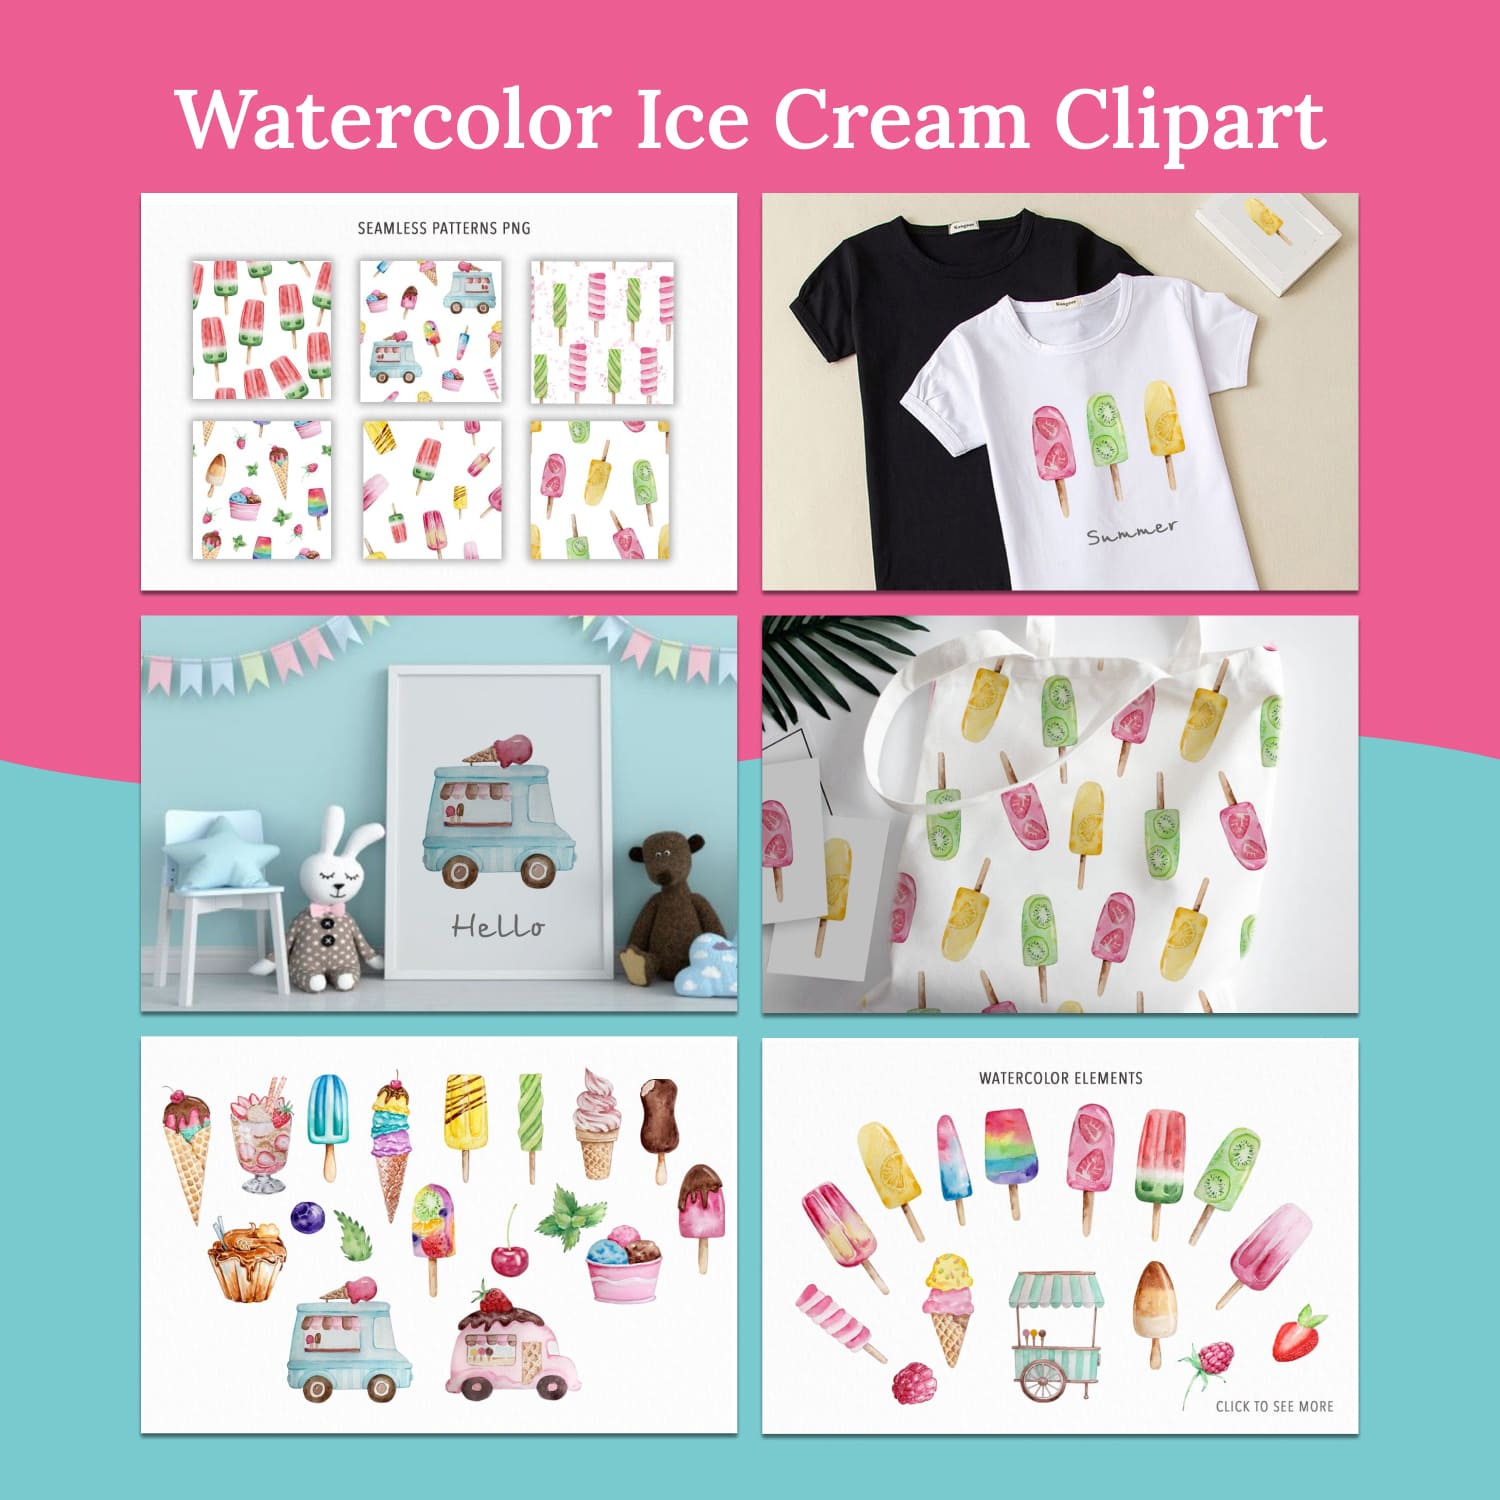 Watercolor ice cream clipart2 - main image preview.